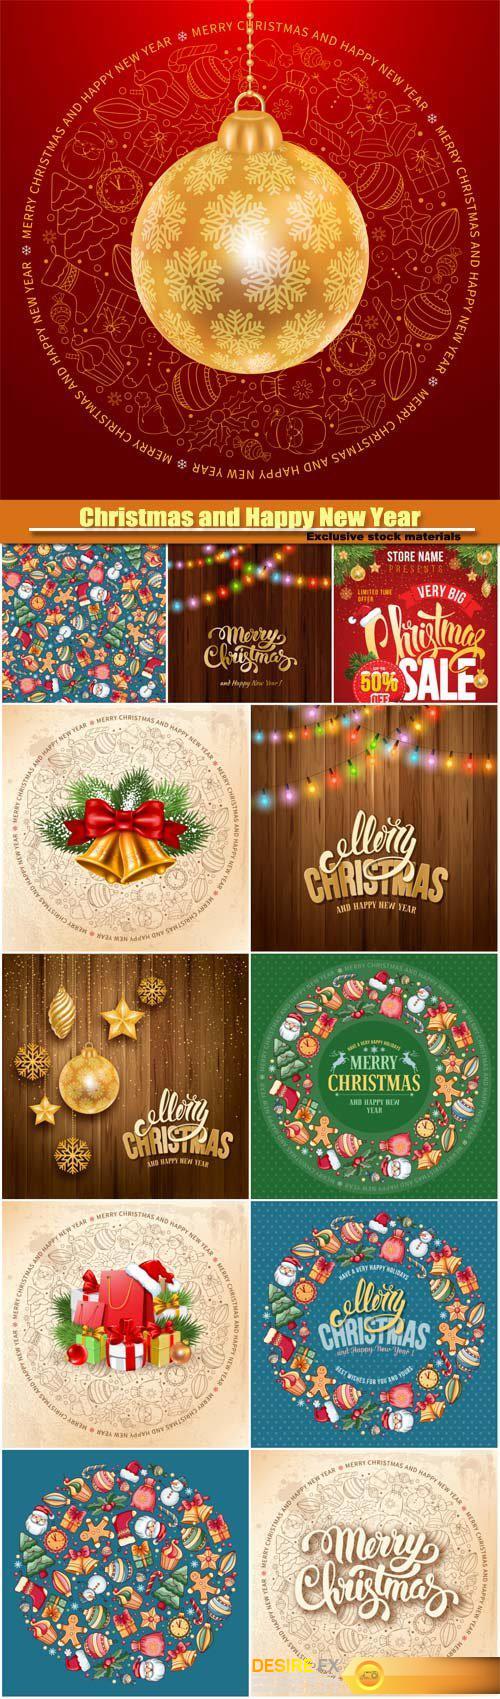 Christmas and Happy New Year vector greeting card